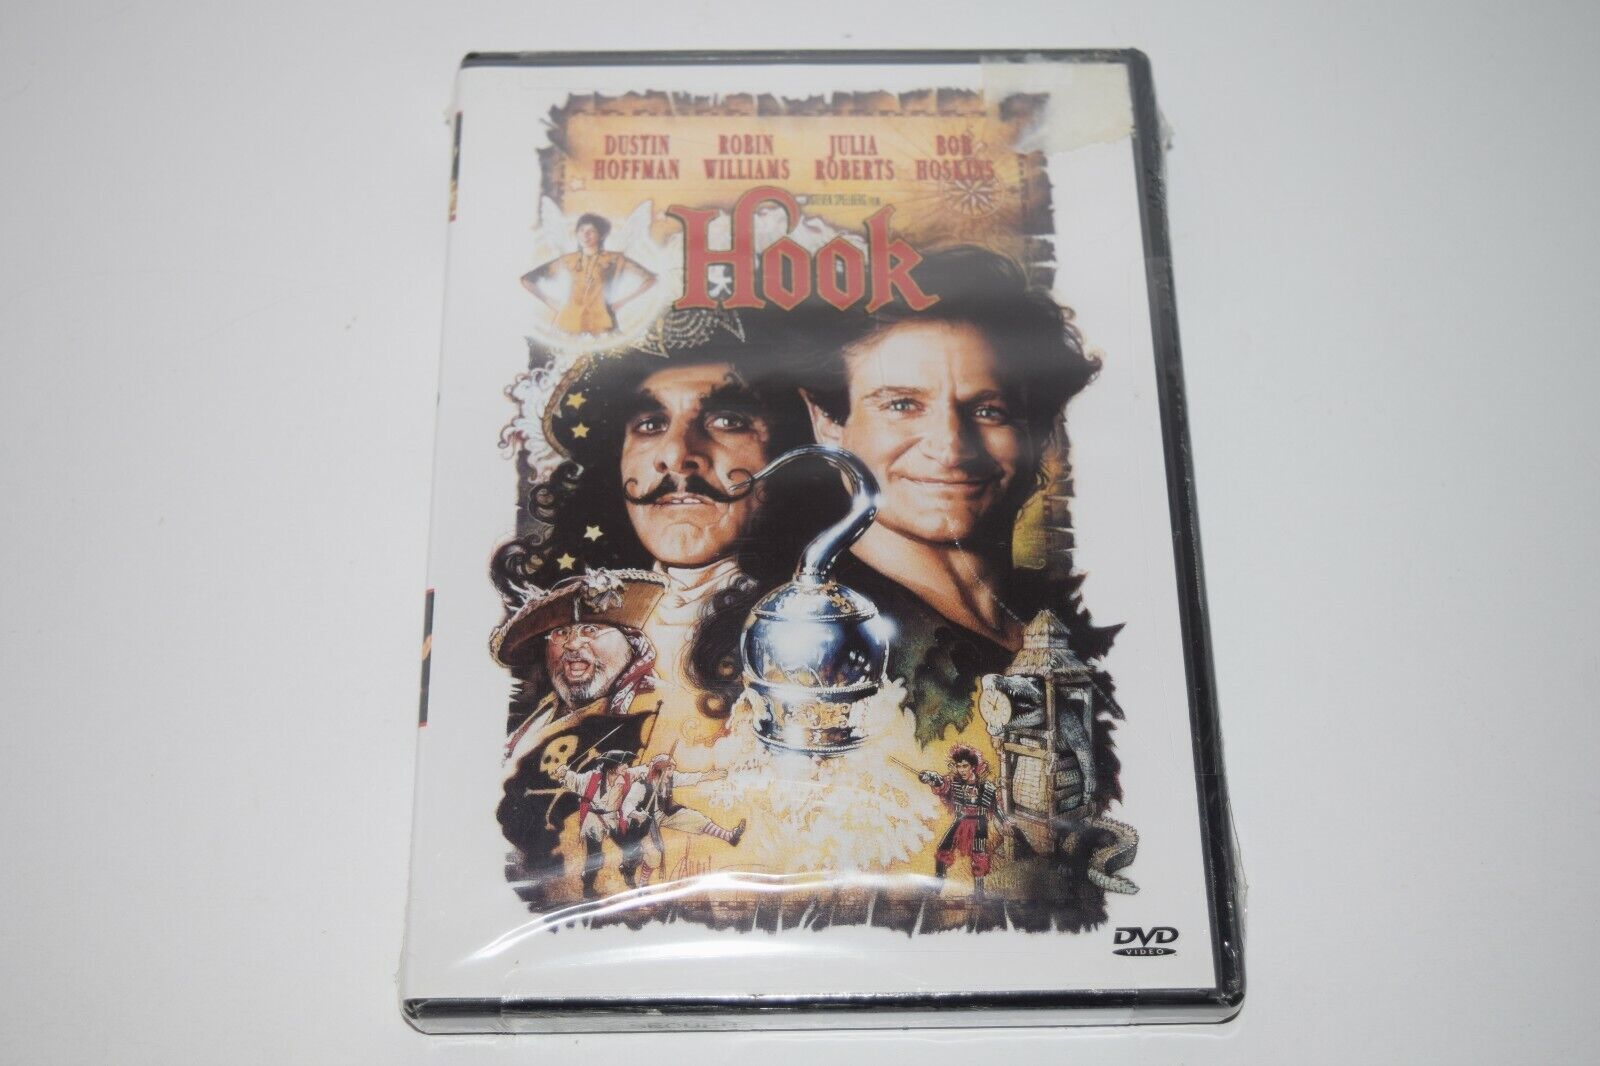 Primary image for Hook (DVD, 2000, Closed Caption)